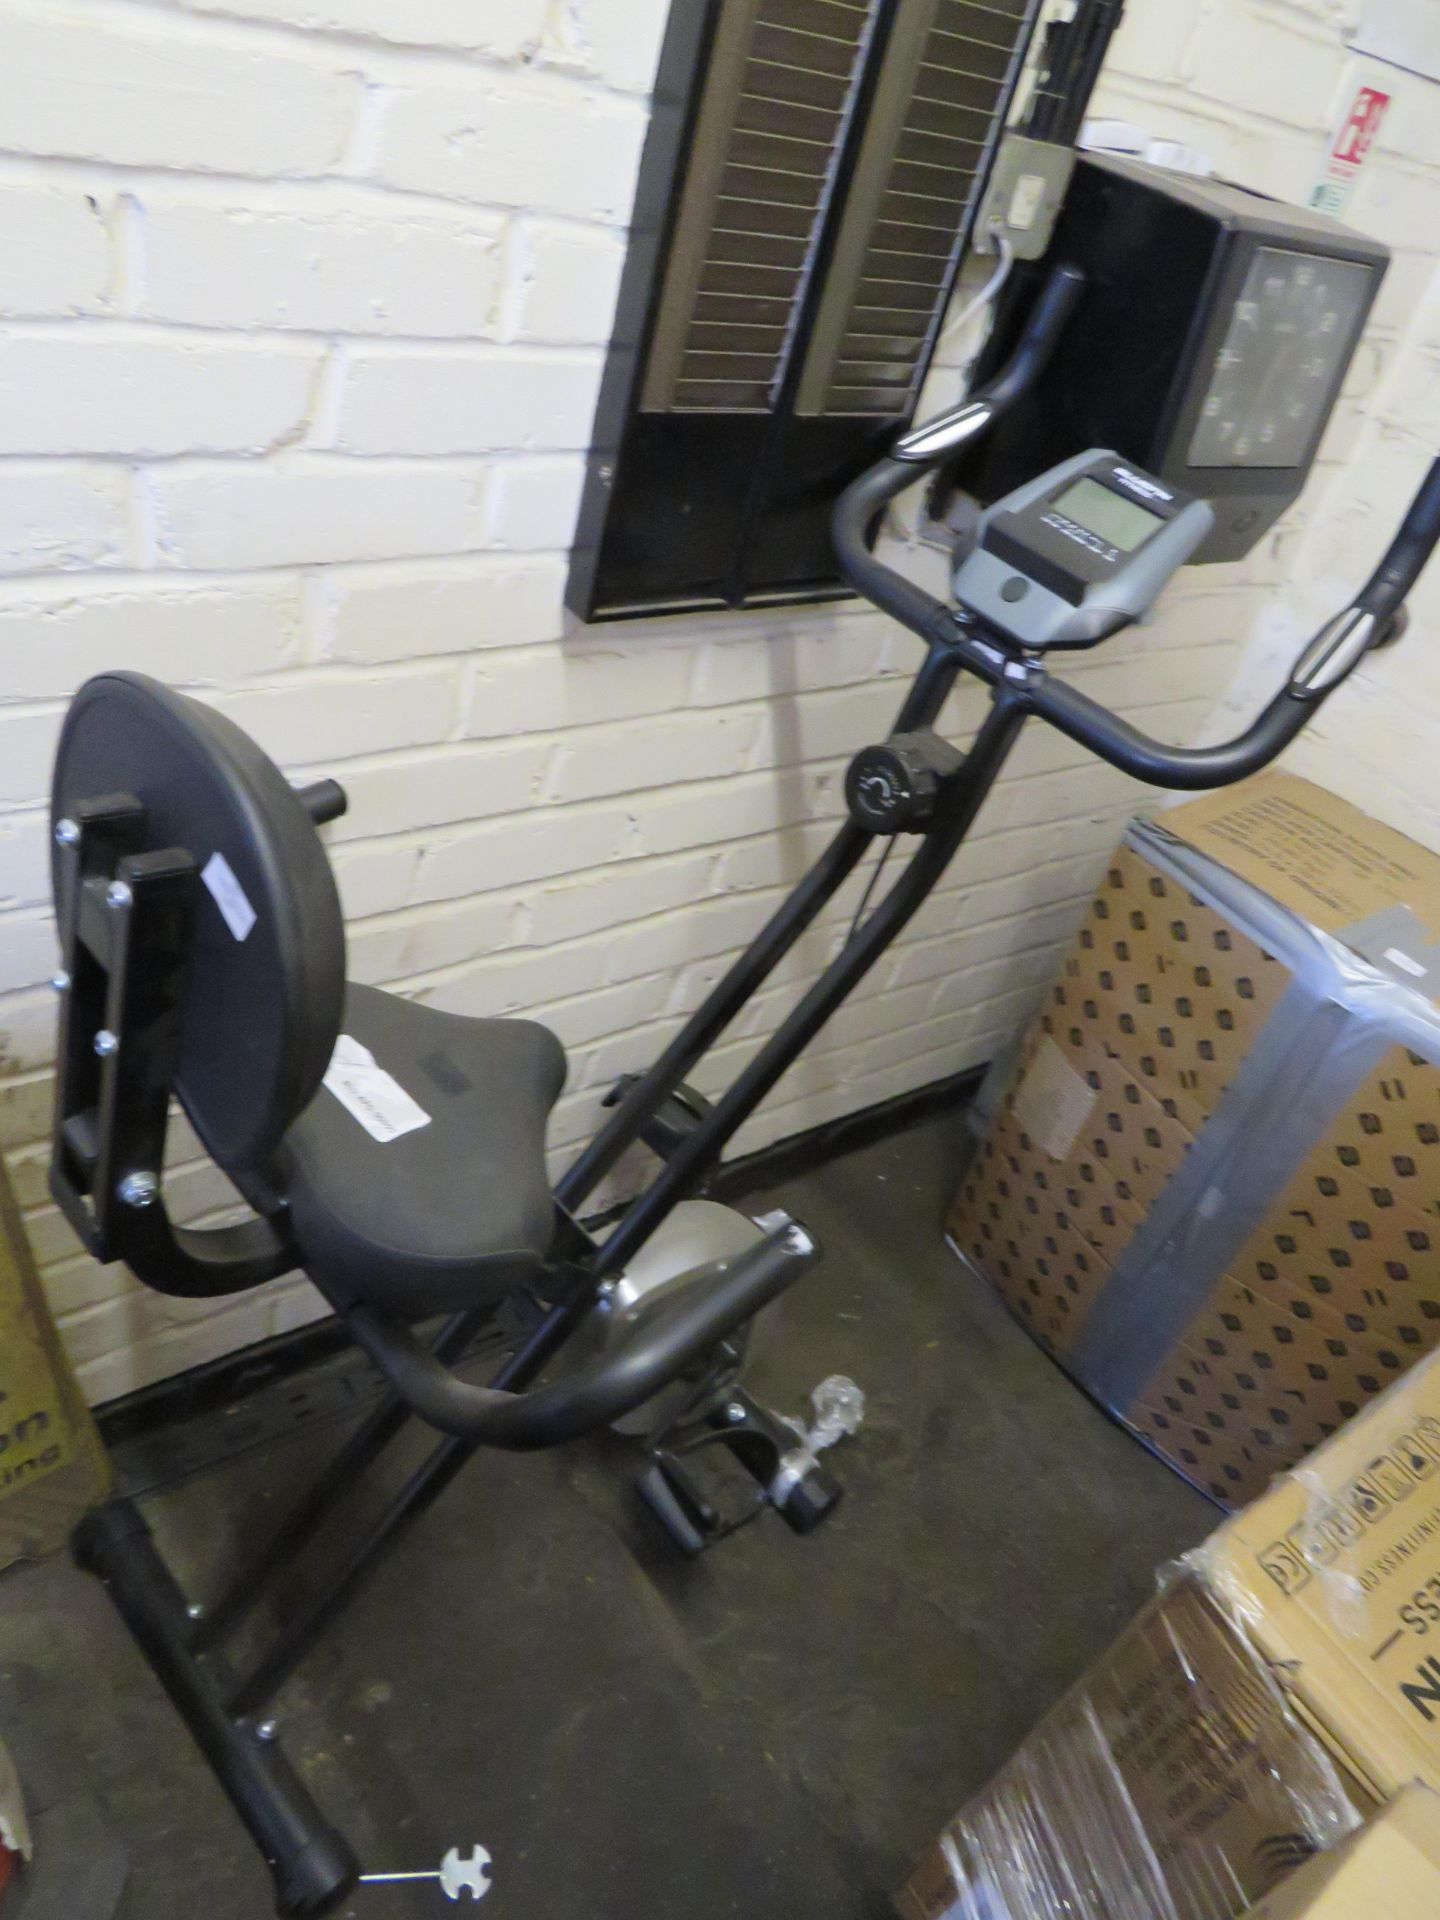 Bluefin Fitness Tour XP Exercise Bike RRP 199.00The Bluefin Fitness Tour XP exercise bike is our